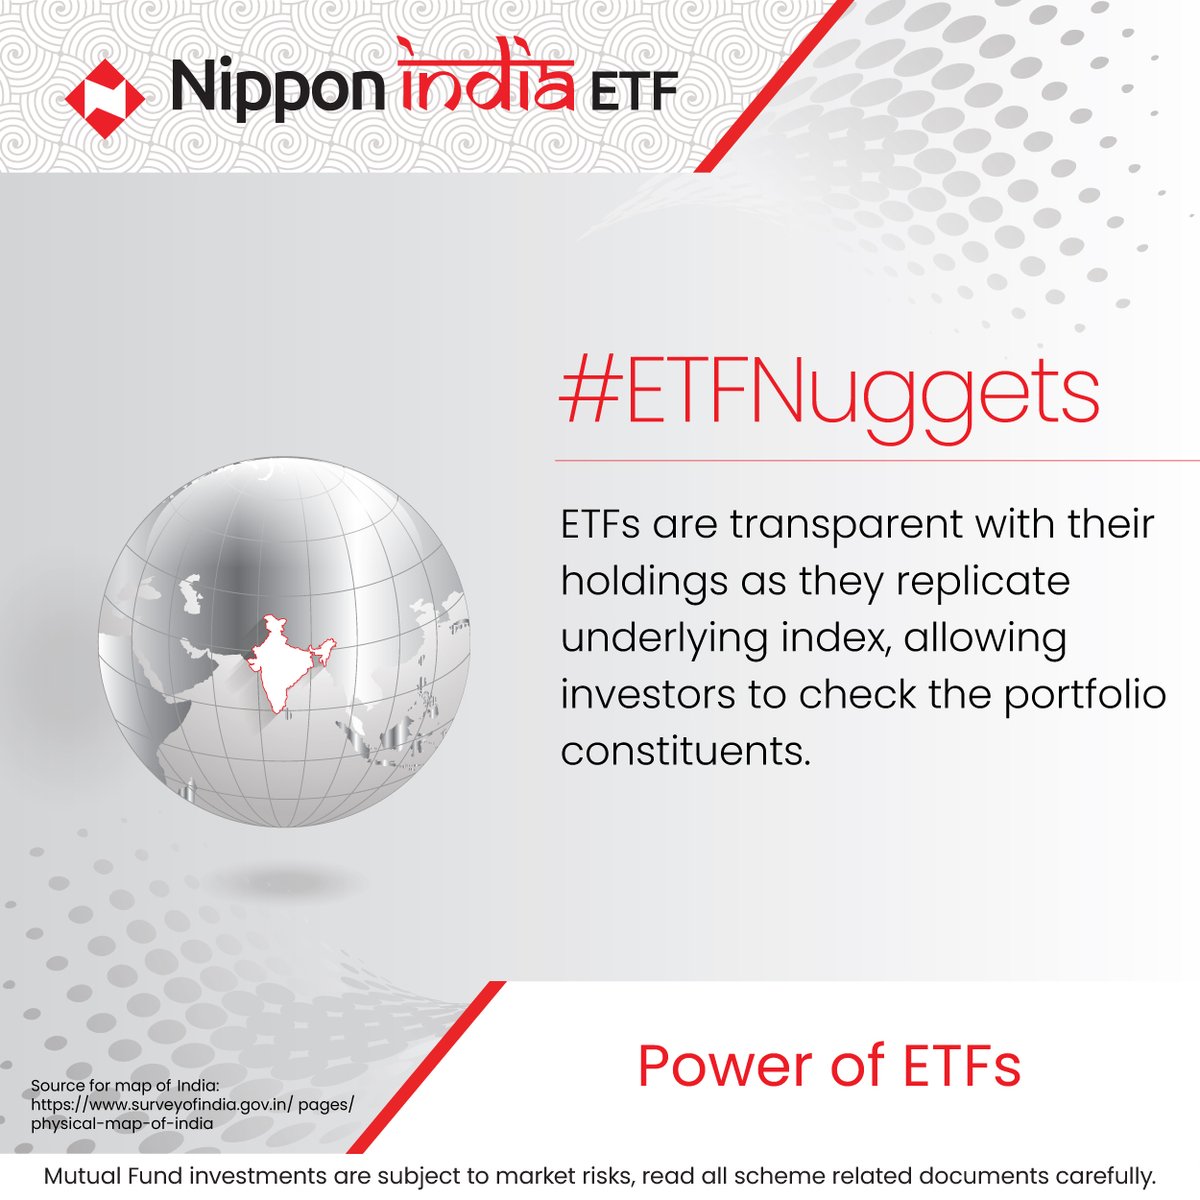 You think you know your ETFs well? Come test your knowledge.

Nippon India ETF brings to you ETF Nuggets.

One interesting fact about ETFs on every Monday.

Read up and let us know if you know a thing or two about it

#Investment #Savings #FinancialGoals #ETFIndia #NipponIndiaETF